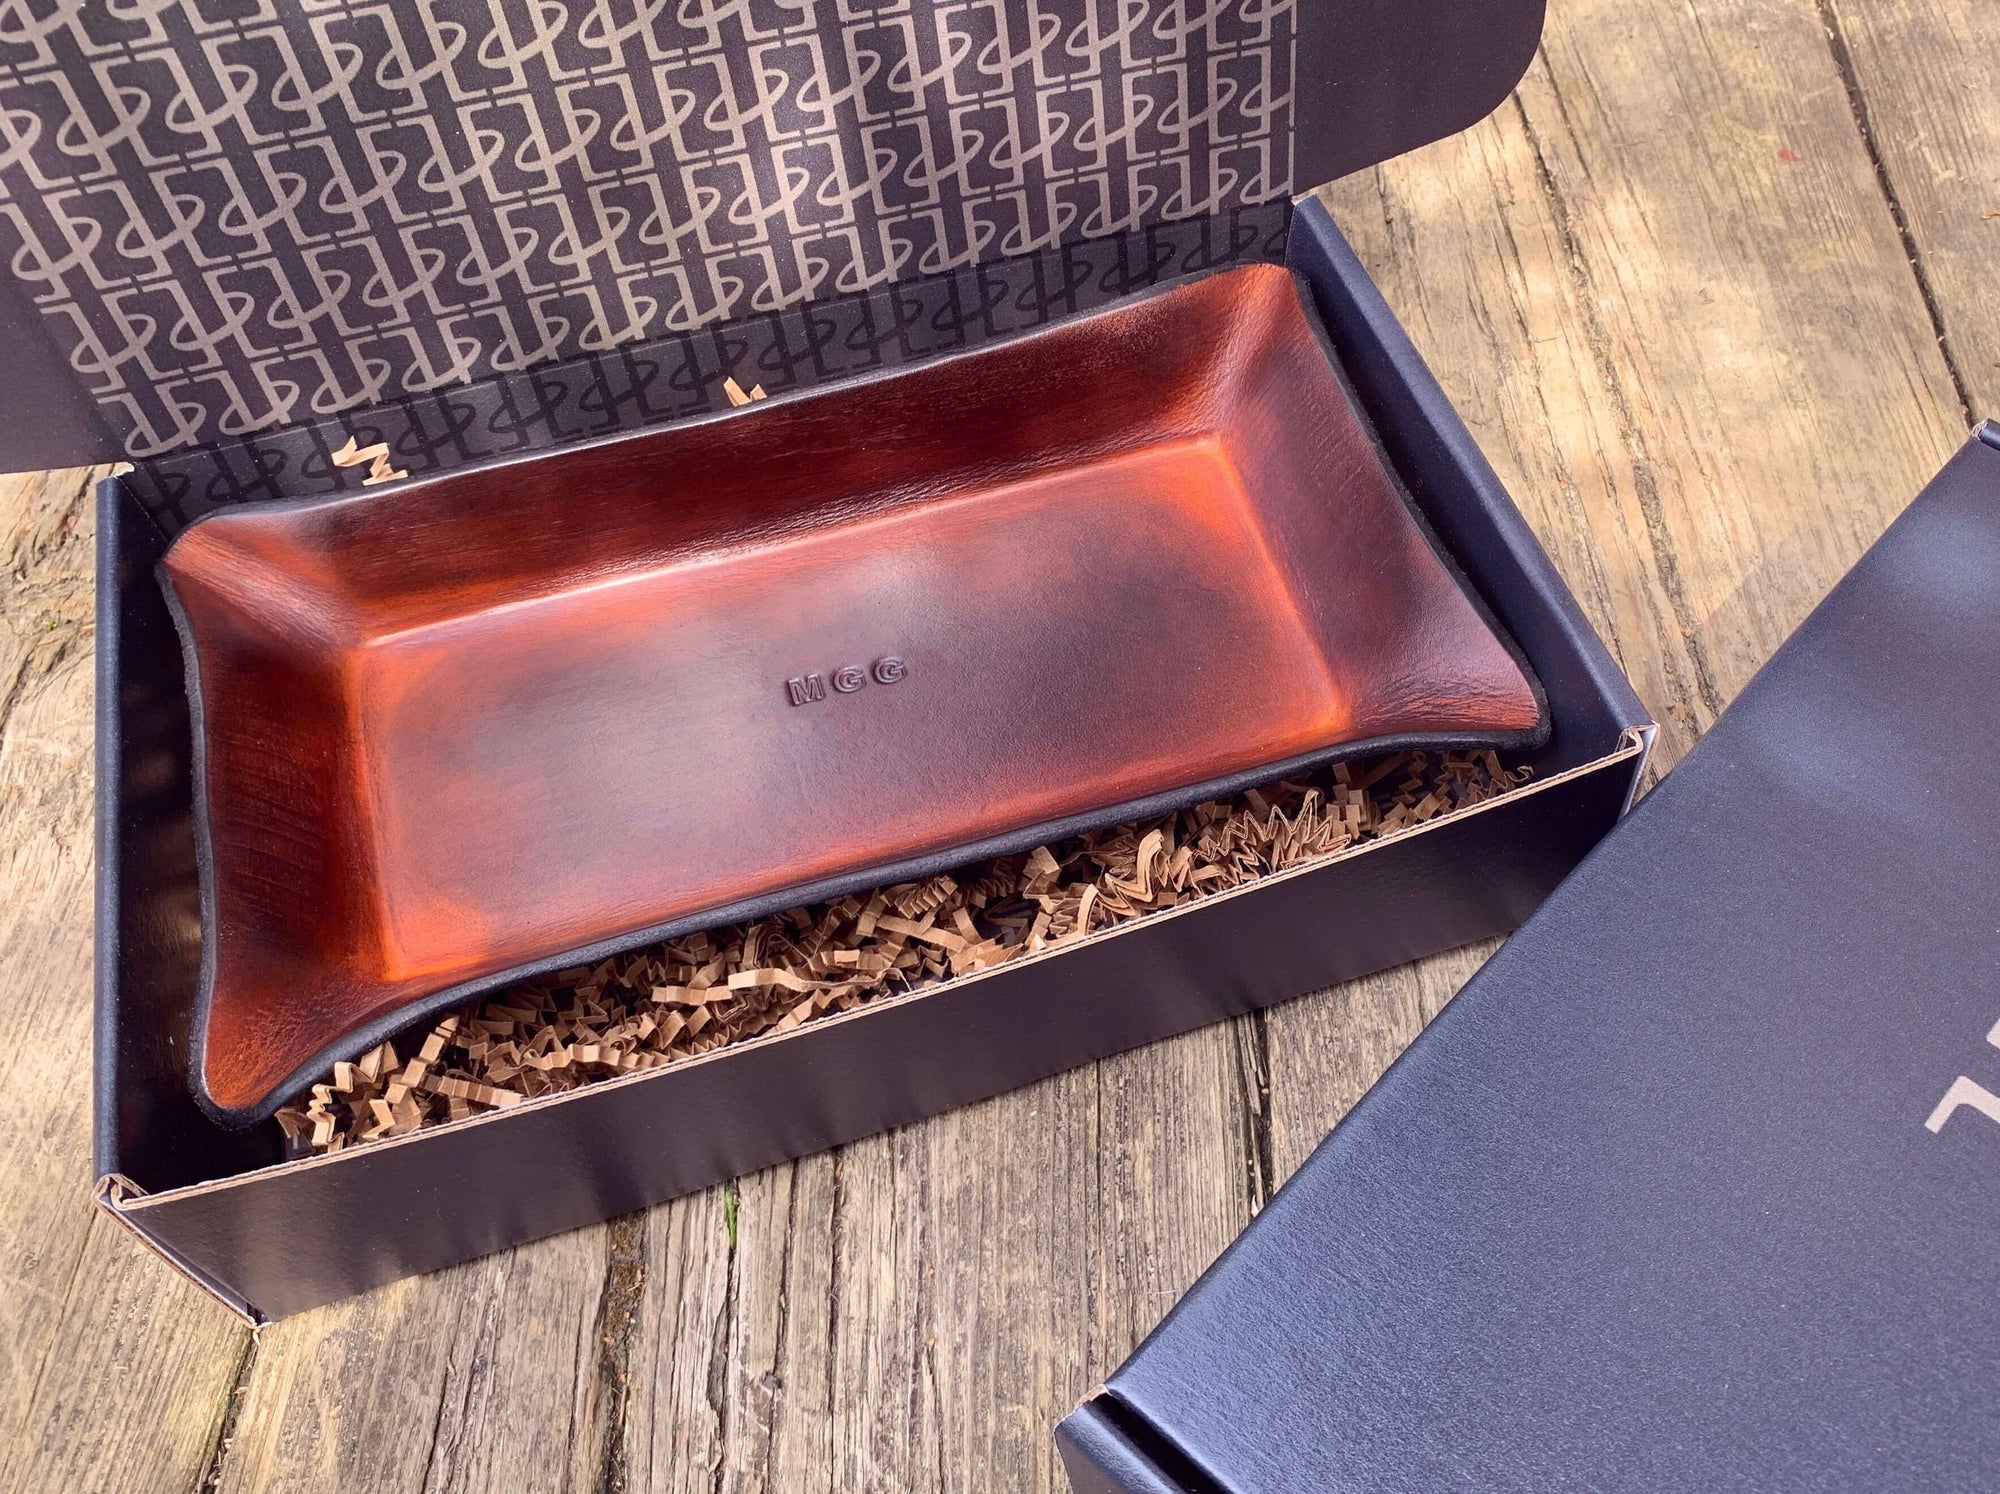 Valet tray with monogram. Groosmen's gift in timber brown.